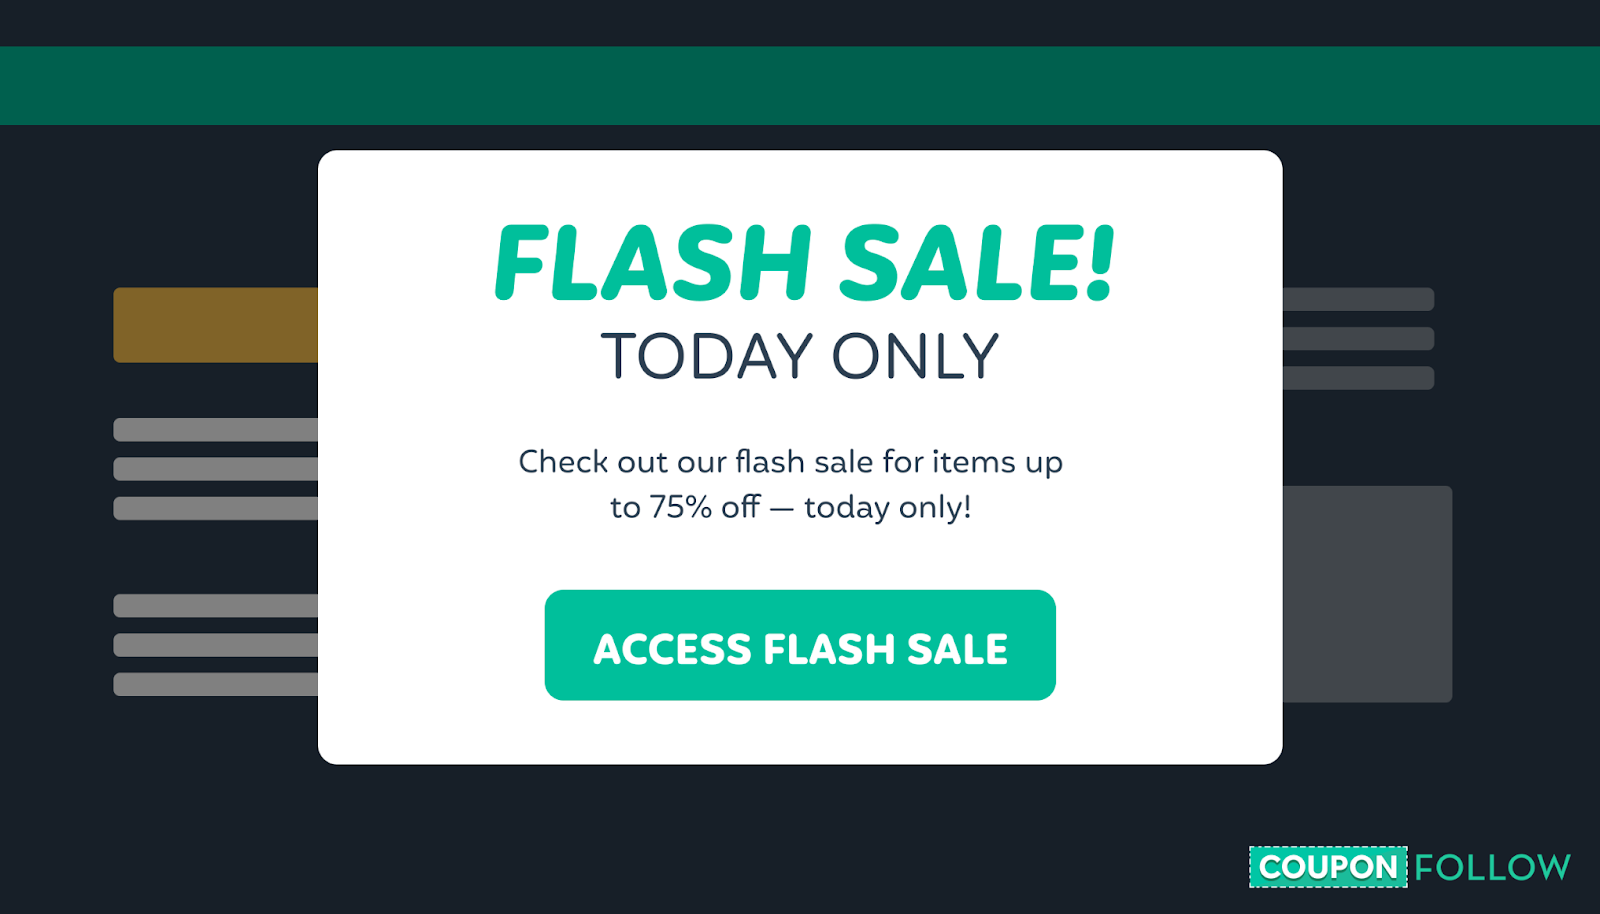 Example of how a flash sale should create urgency